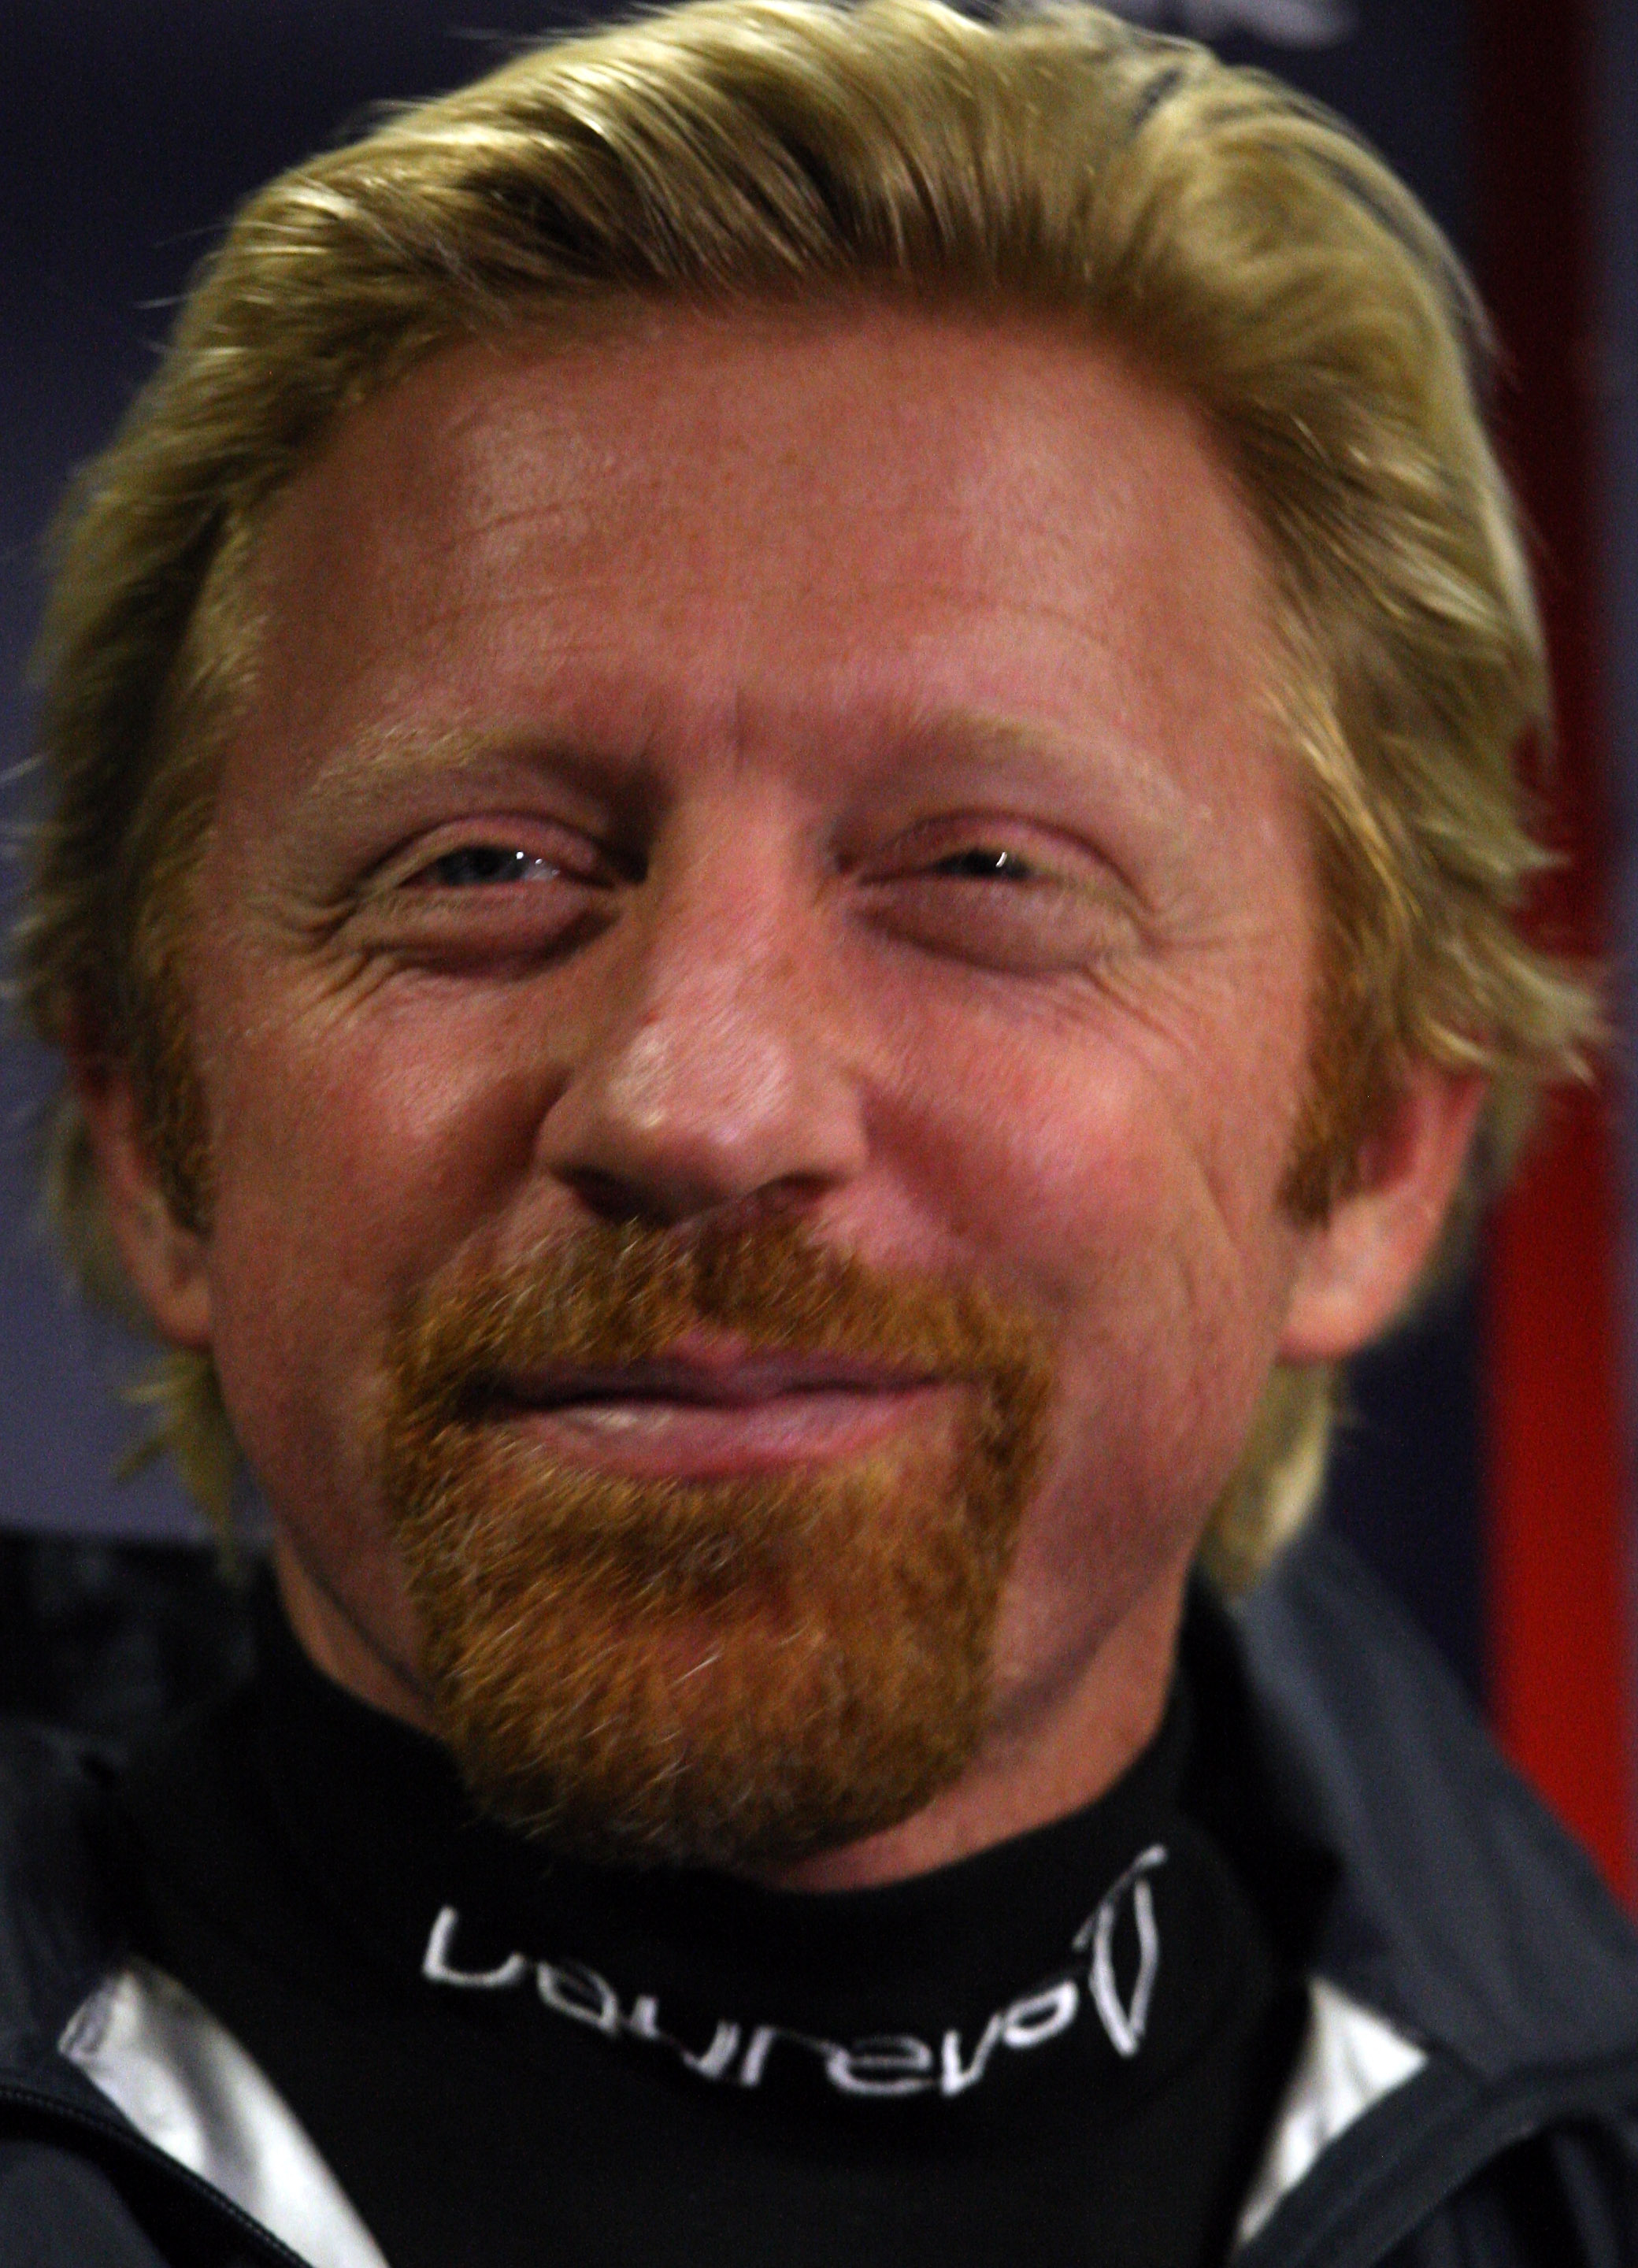 MILTON KEYNES, UNITED KINGDOM - DECEMBER 03:  Boris Becker of Germany gives a press conference during Laureus MotorV8 event at the Dayton Race Track, Milton Keynes on December 3, 2008 in Milton Keynes, EWngland.  (Photo by Ross Kinnaird/Getty Images for L